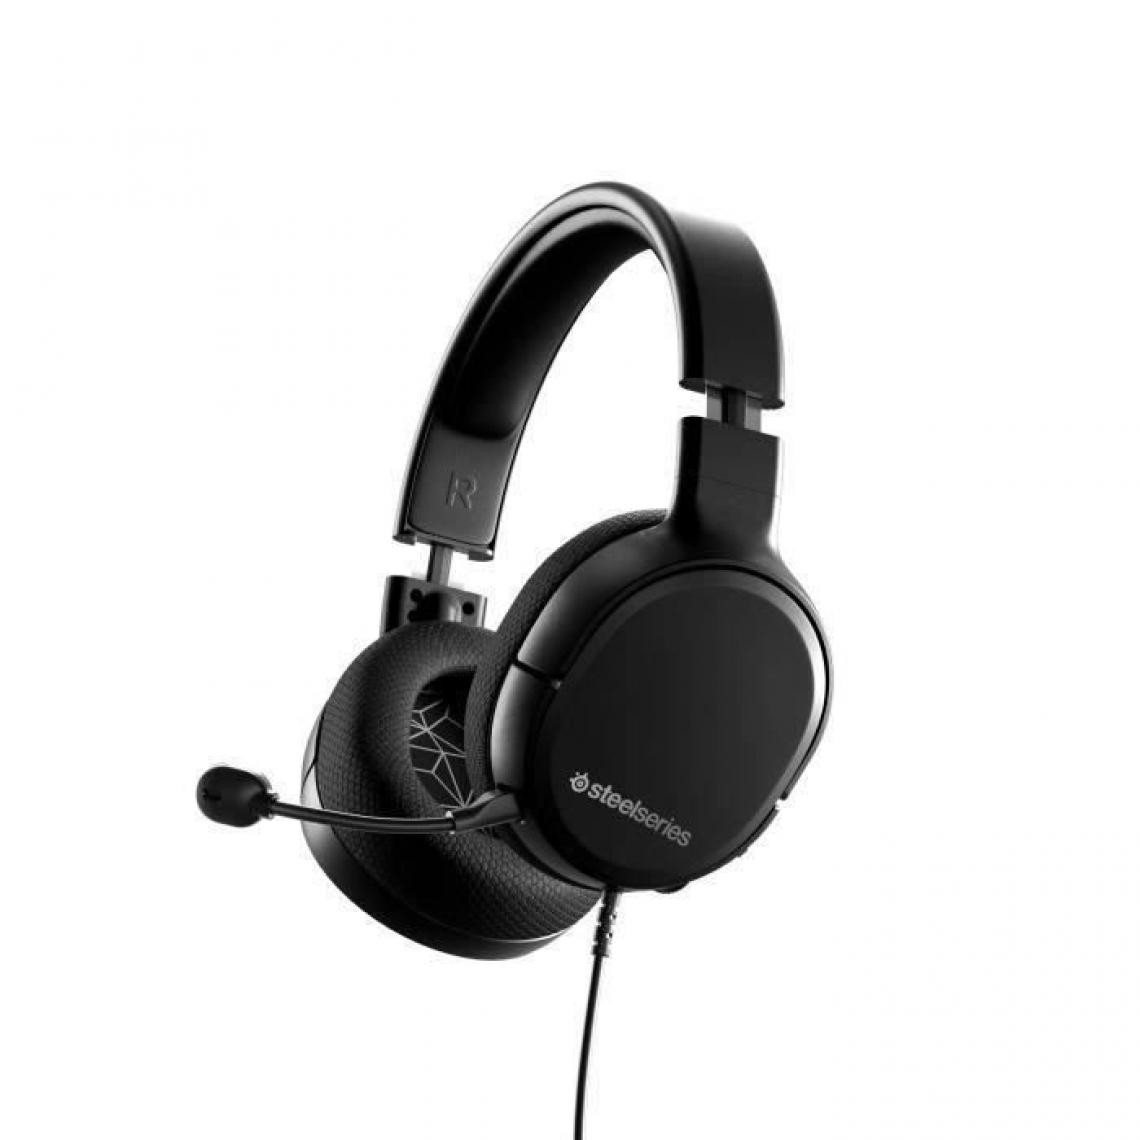 Steelseries - STEELSERIES Casque Gamer Arctis 1 Console (PS5 / PS4) - Micro-Casque